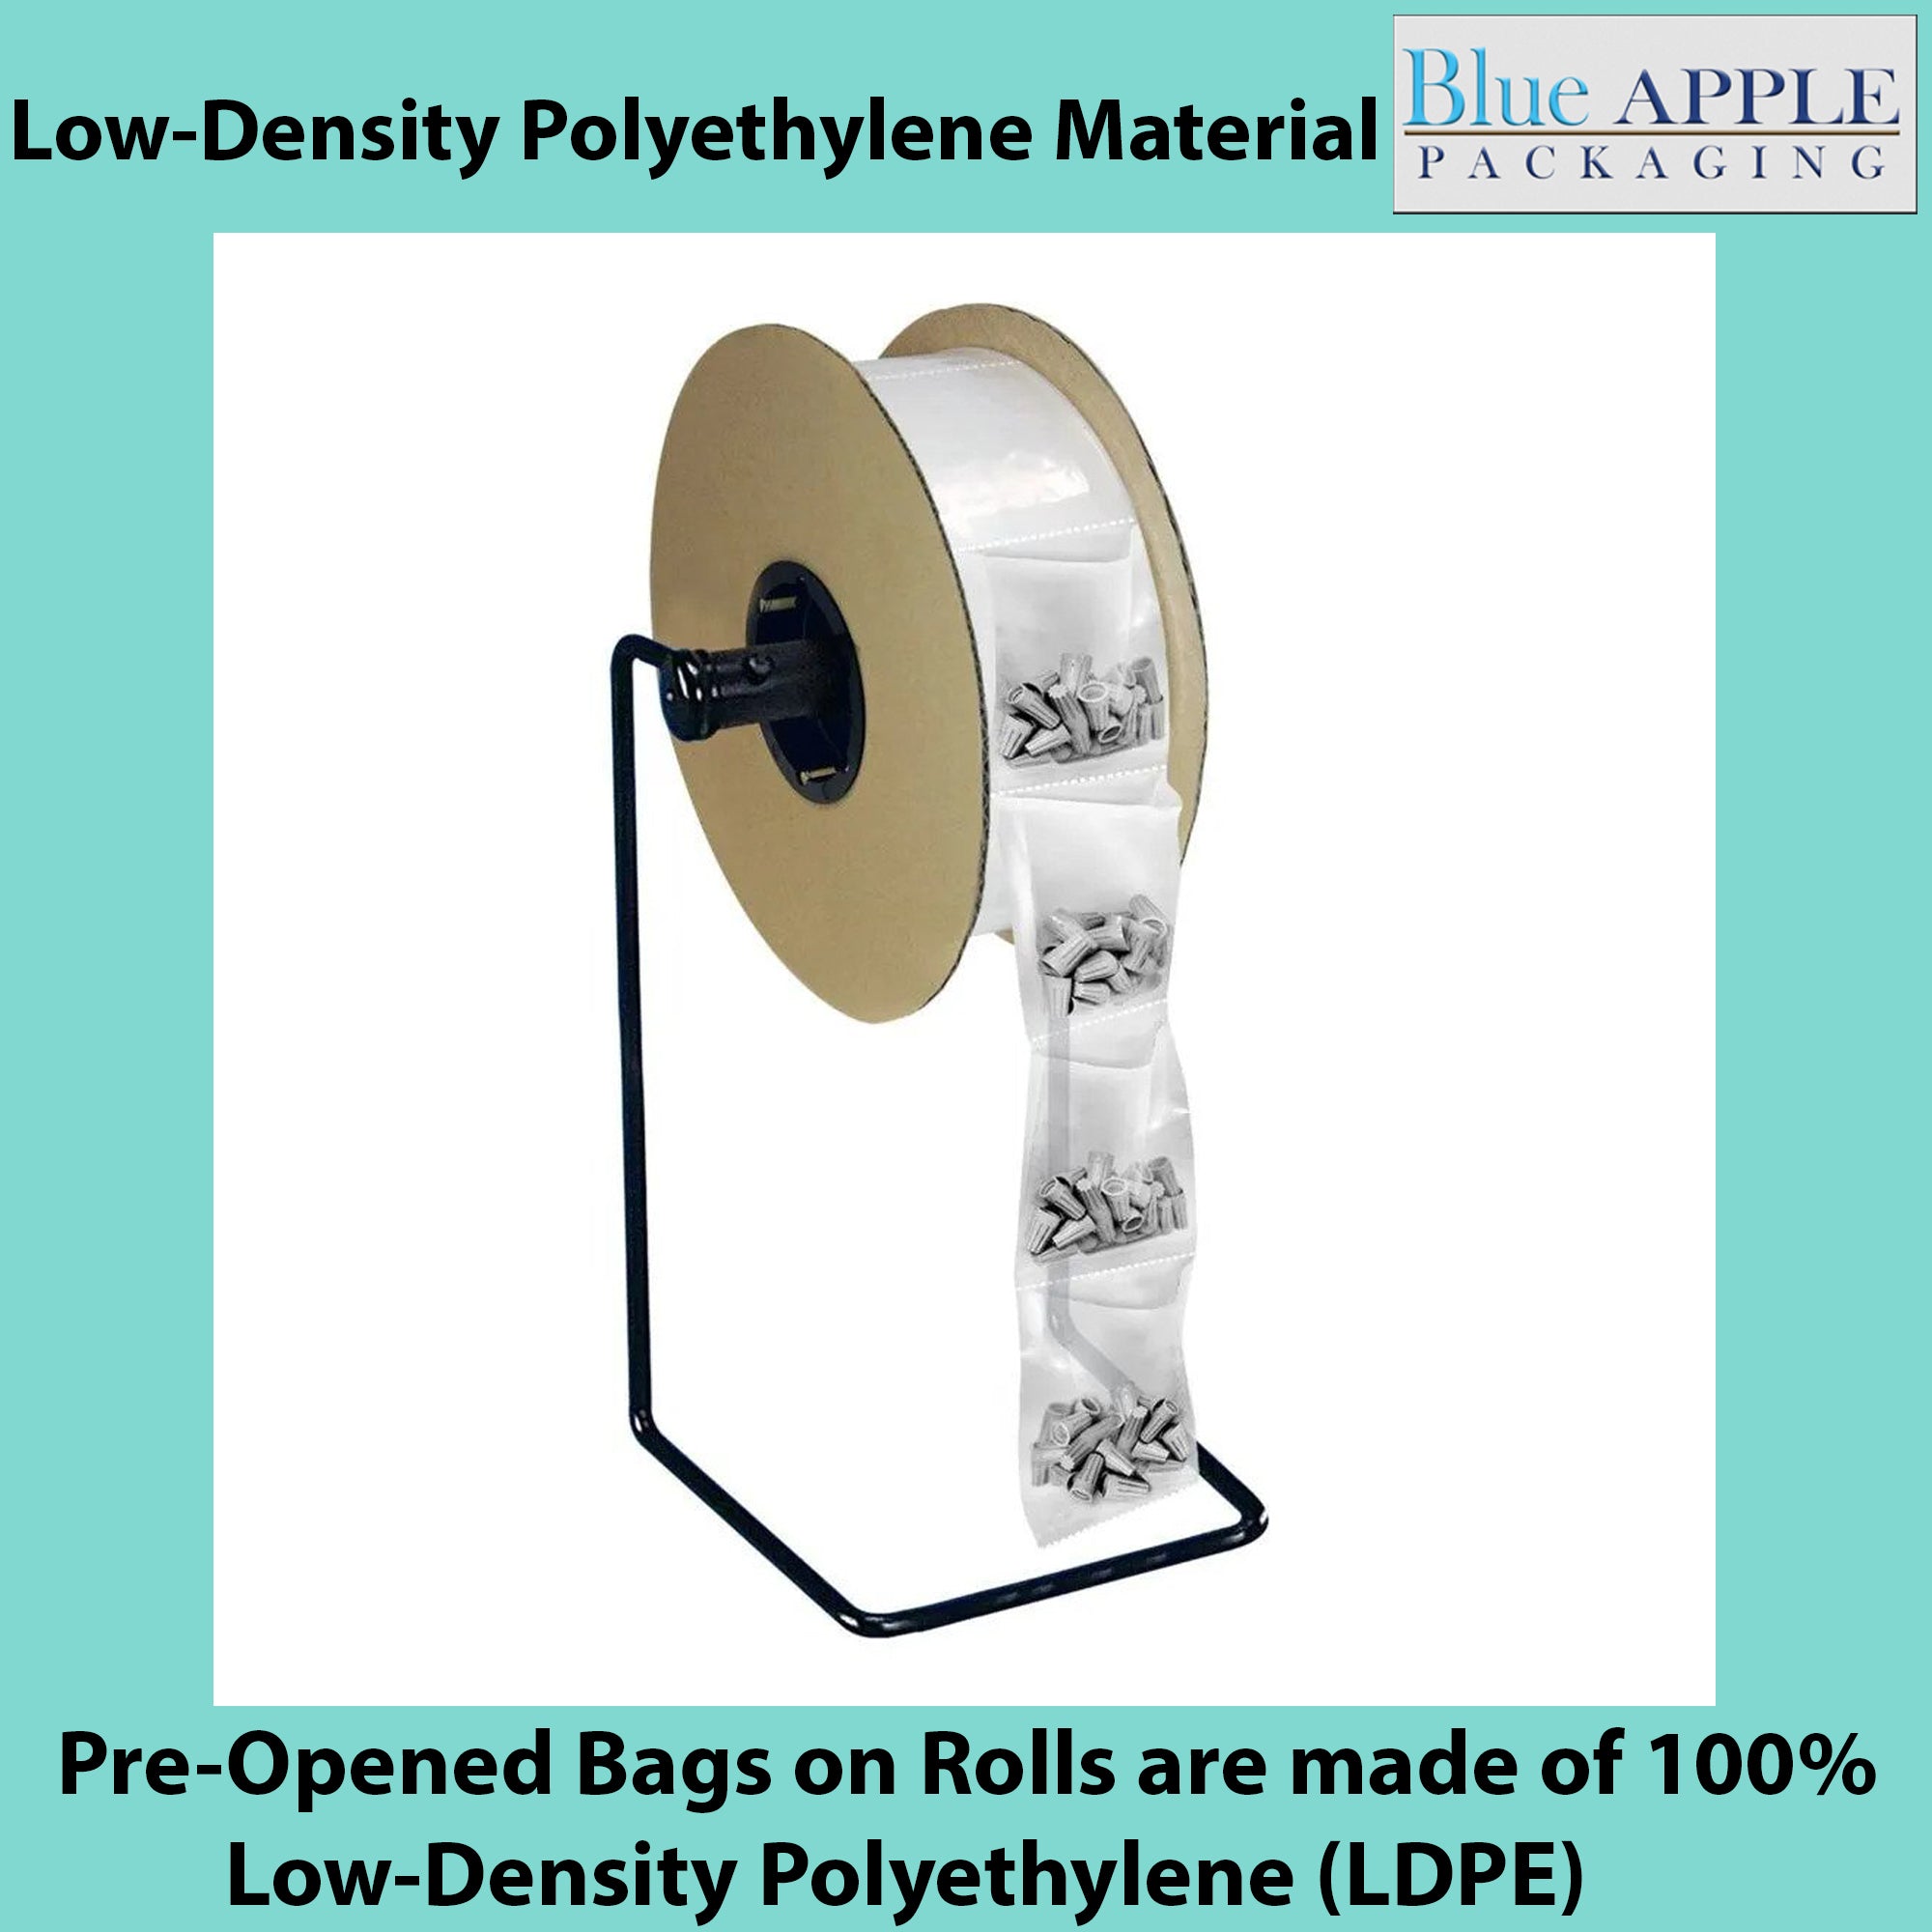 Autobag Heavy Perforated Roll Auto Fill Poly Bags- 6"x10", 2.75 Mil - 750 Bags